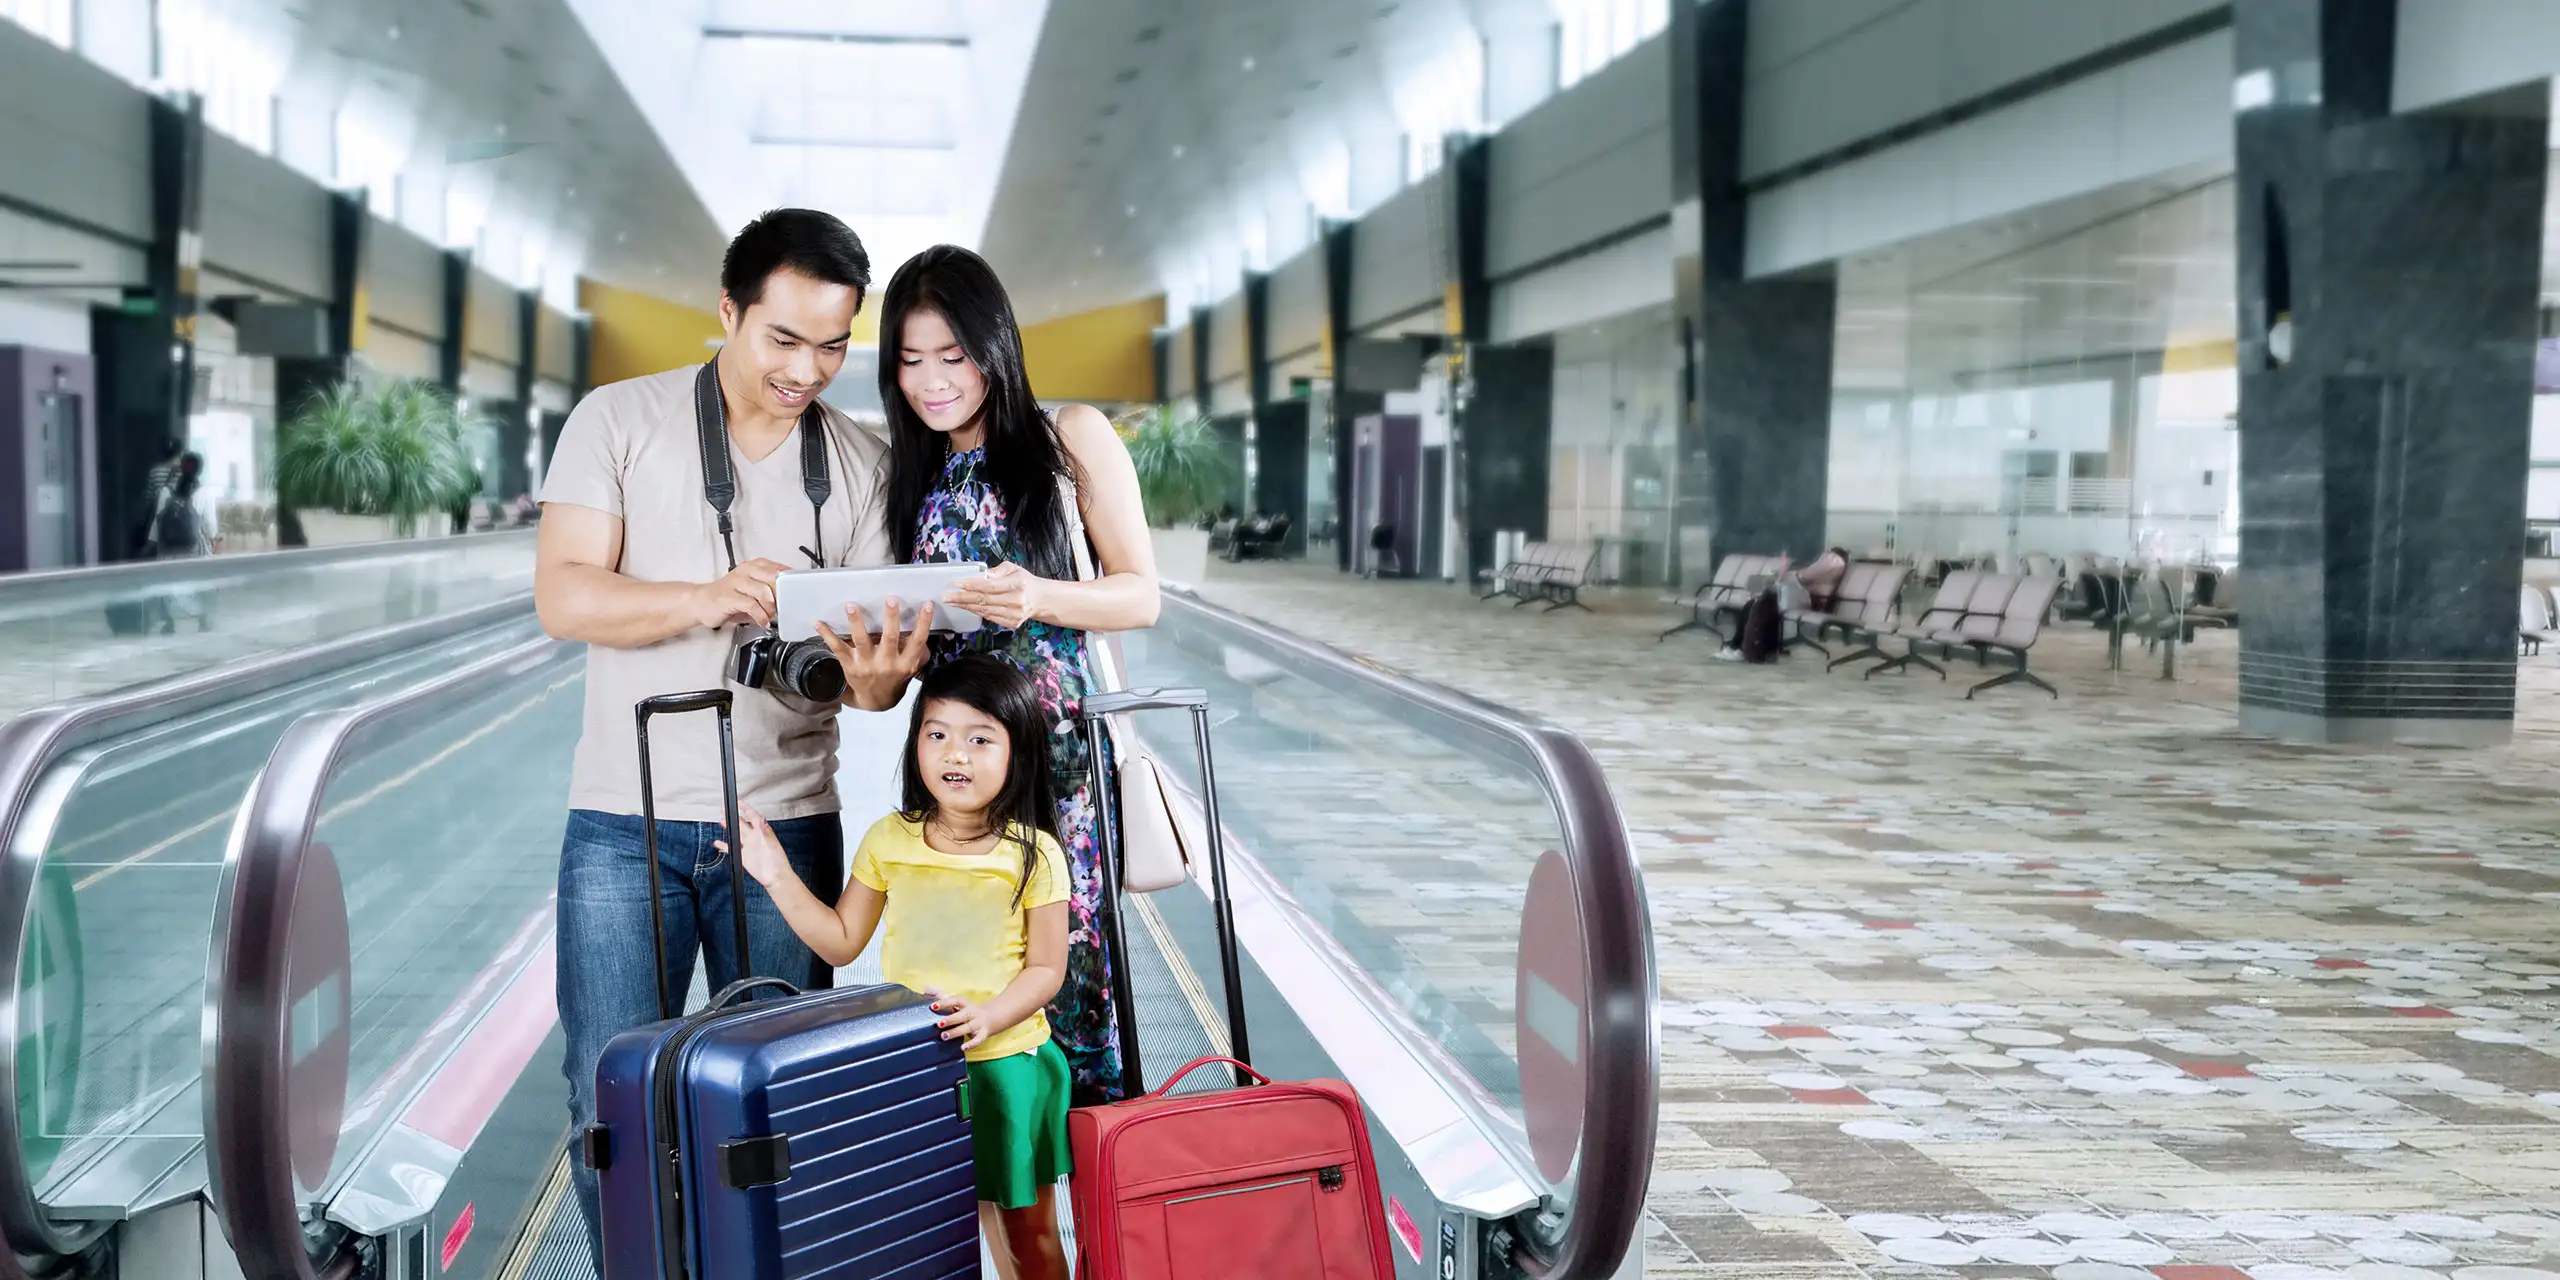 Asian Family at Airport: Courtesy of Creativa Images/Shutterstock.com